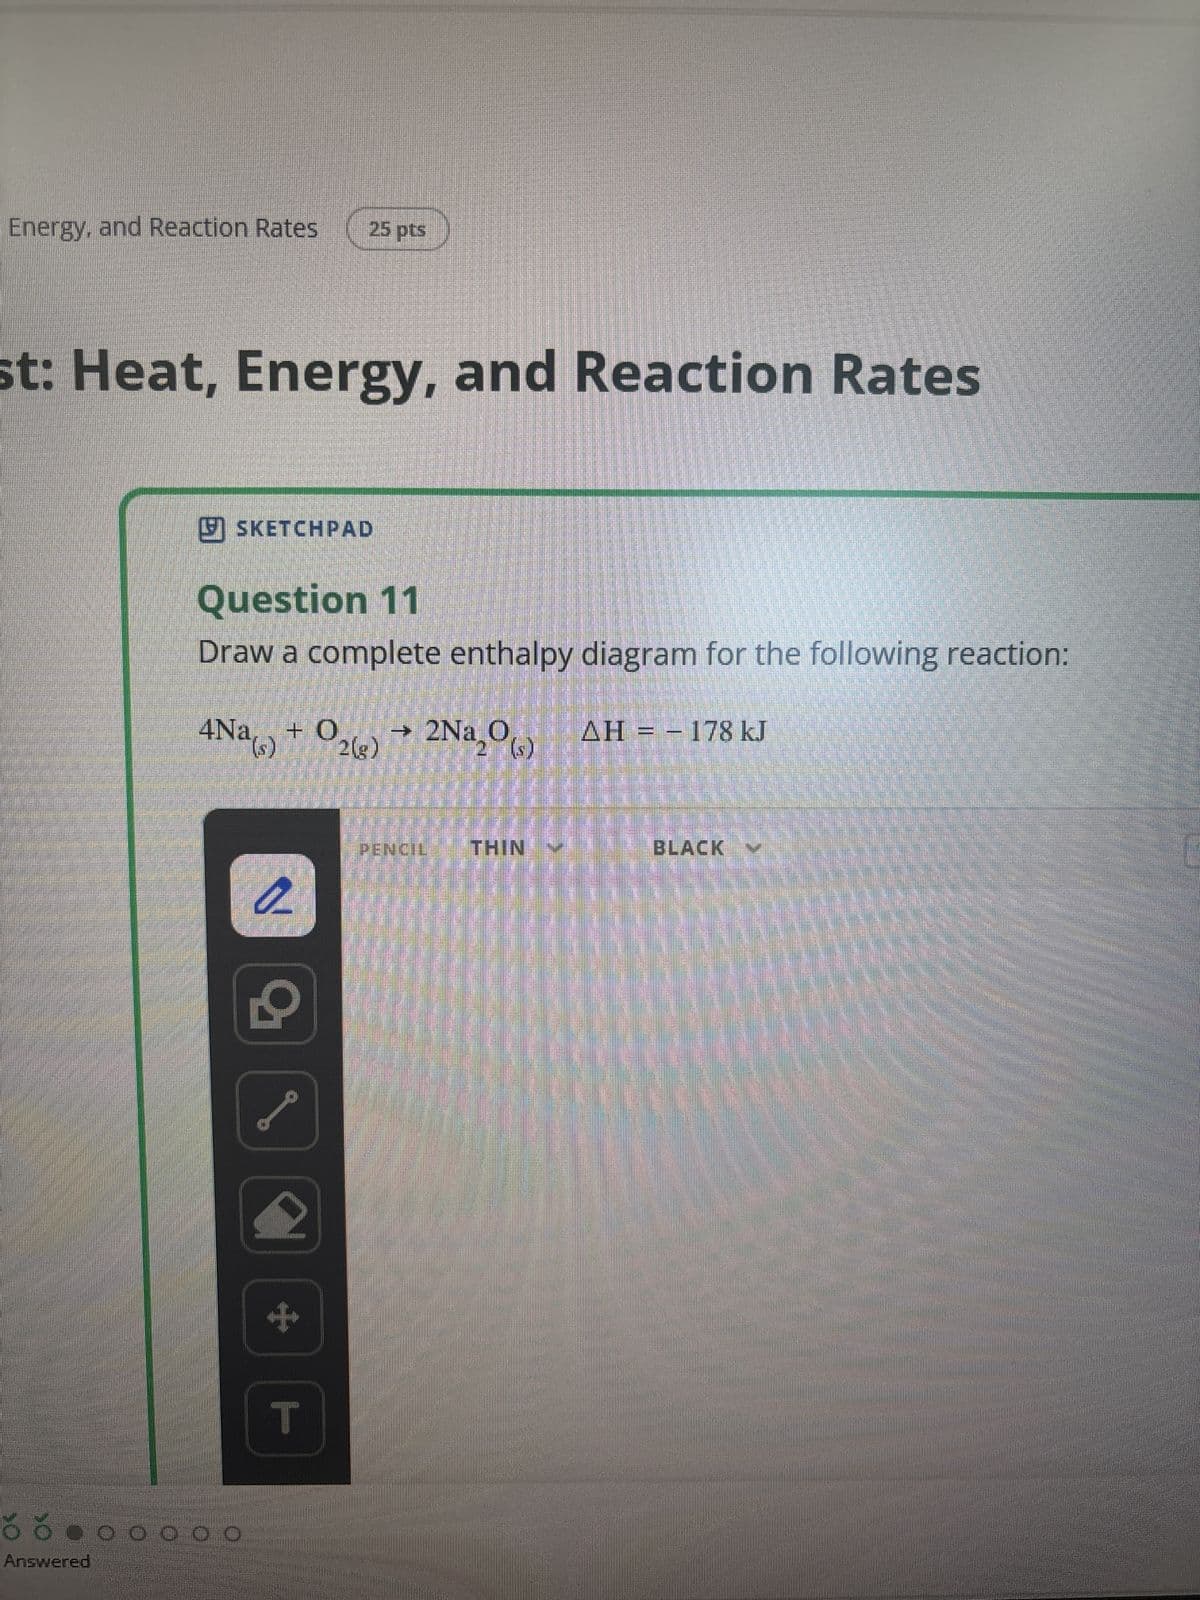 Energy, and Reaction Rates
25 pts
st: Heat, Energy, and Reaction Rates
Answered
✓ SKETCHPAD
Question 11
Draw a complete enthalpy diagram for the following reaction:
→
4Na(s) + O2(g) 2Na₂(s) AH = 178 kJ
T
PENCIL THIN ♥
BLACK Y